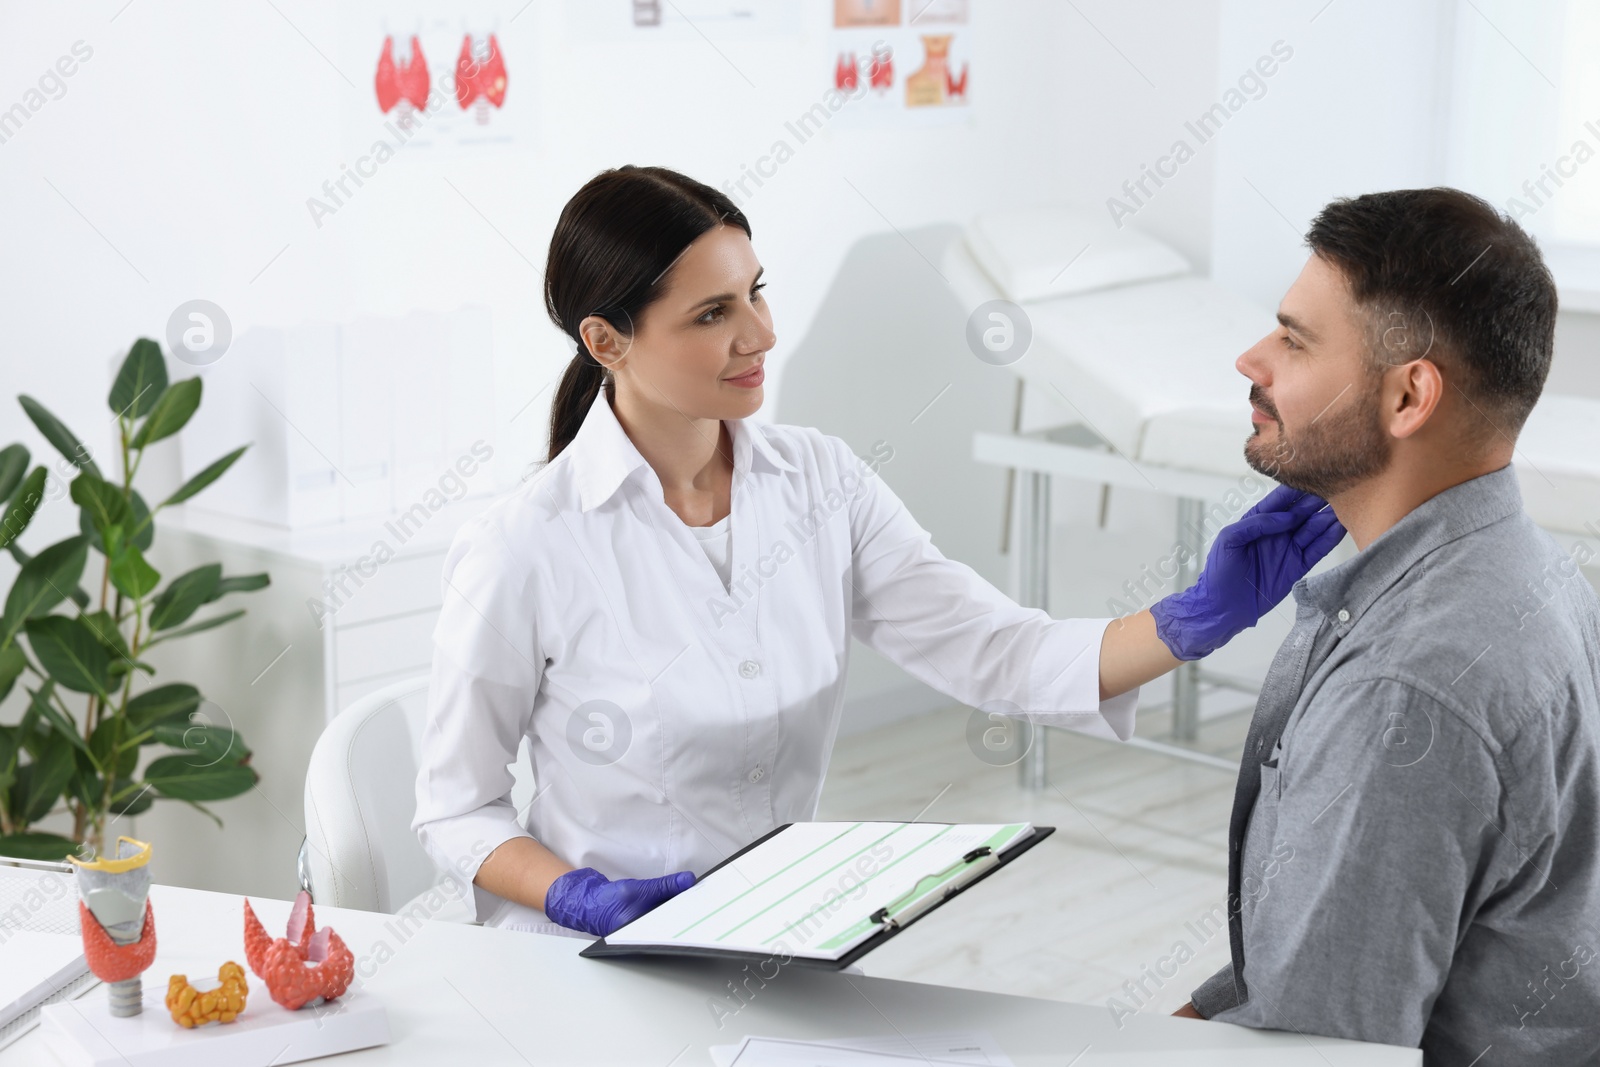 Photo of Endocrinologist examining thyroid gland of patient at table in hospital